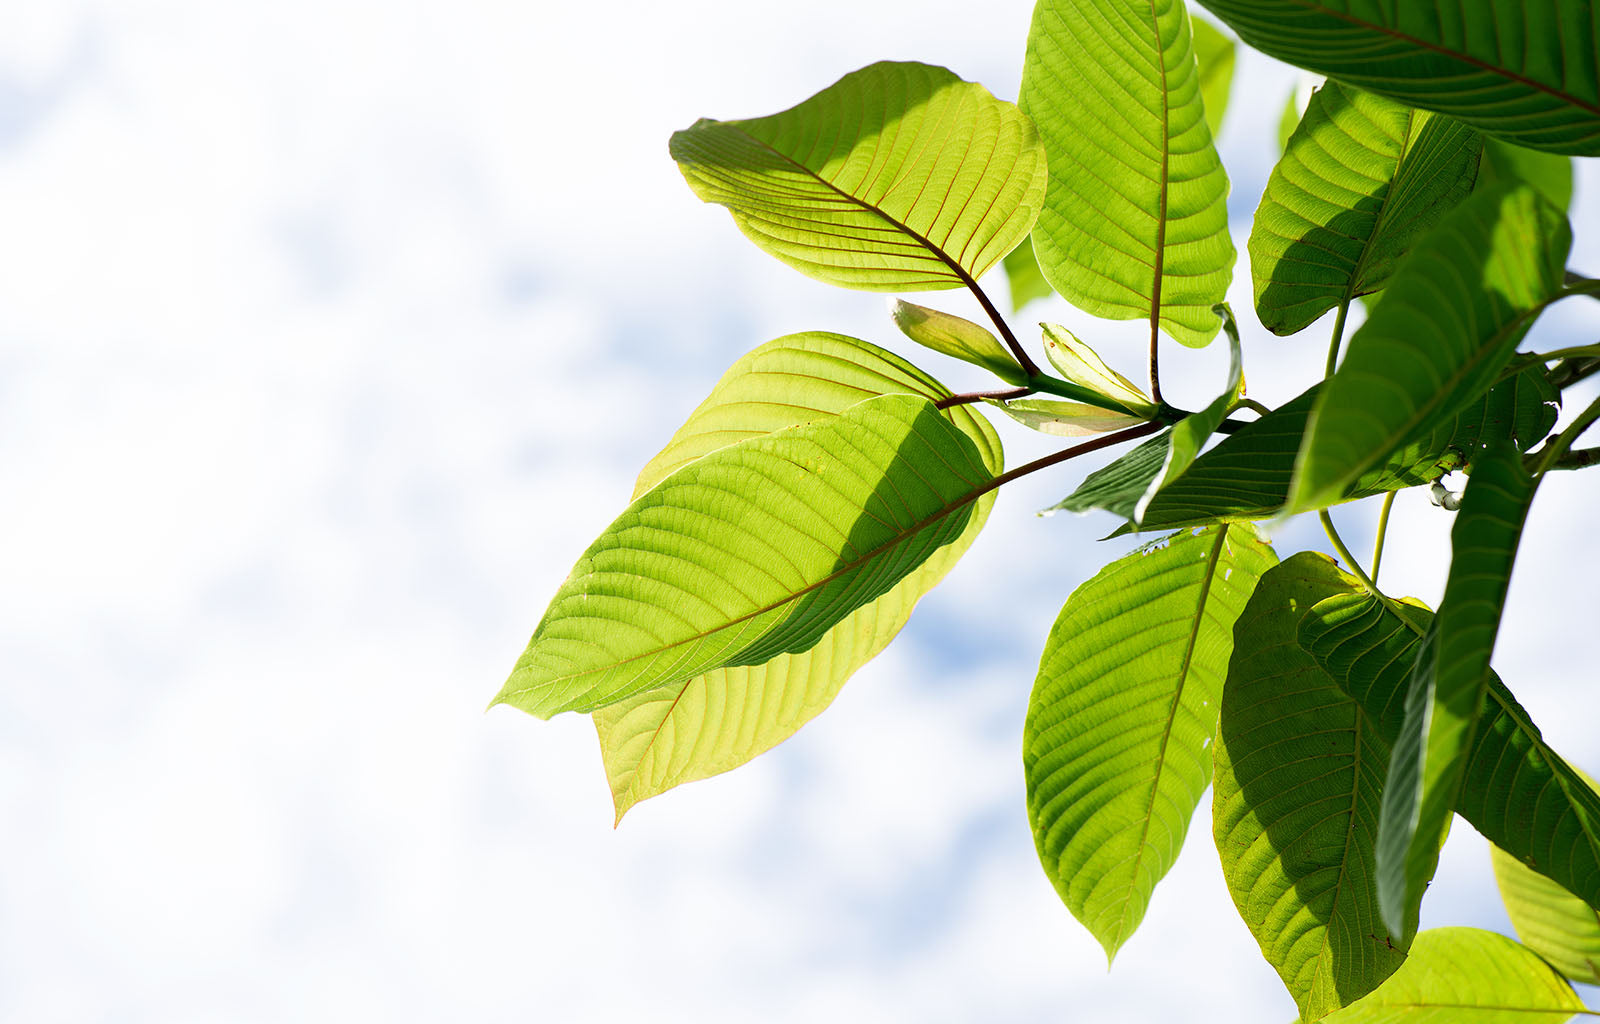 Featured Image depicting a branch of a kratom tree against the backdrop of a sunlit, blue sky. The Kratom tree is covered in bright green veined leaves.